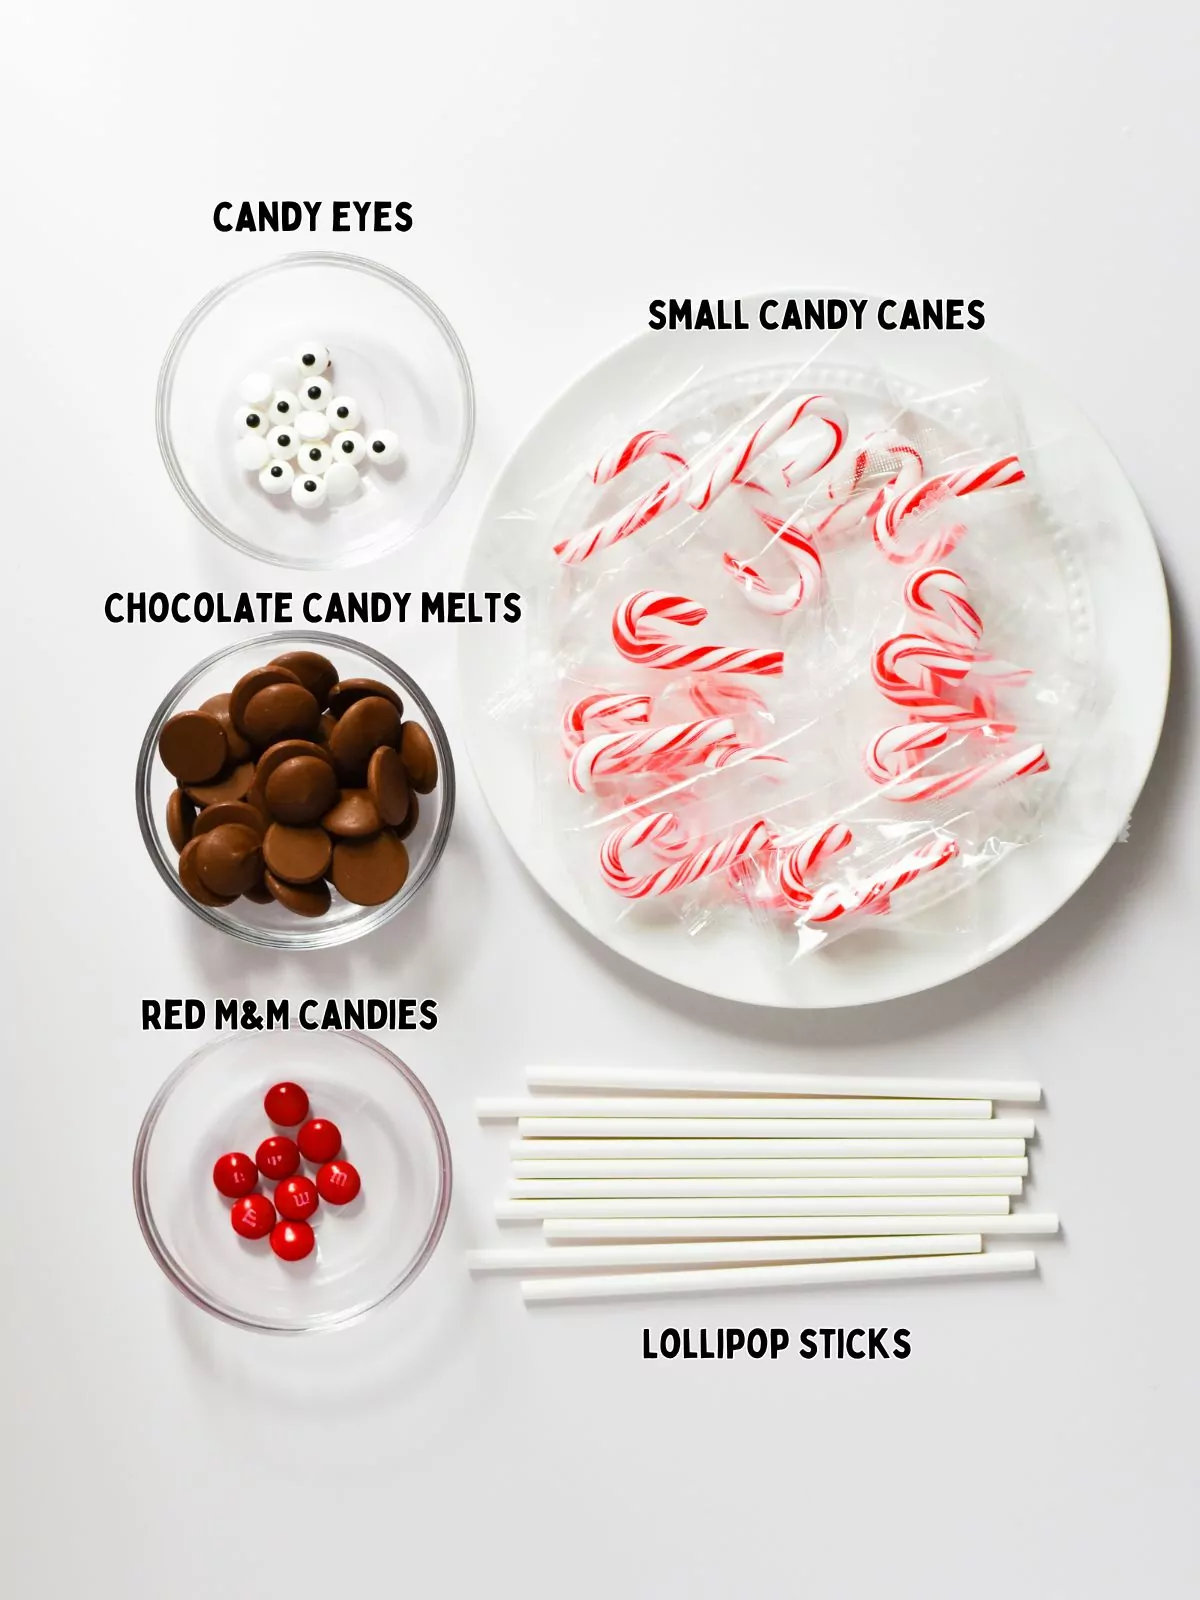 Ingredients for Reindeer Candy Canes.